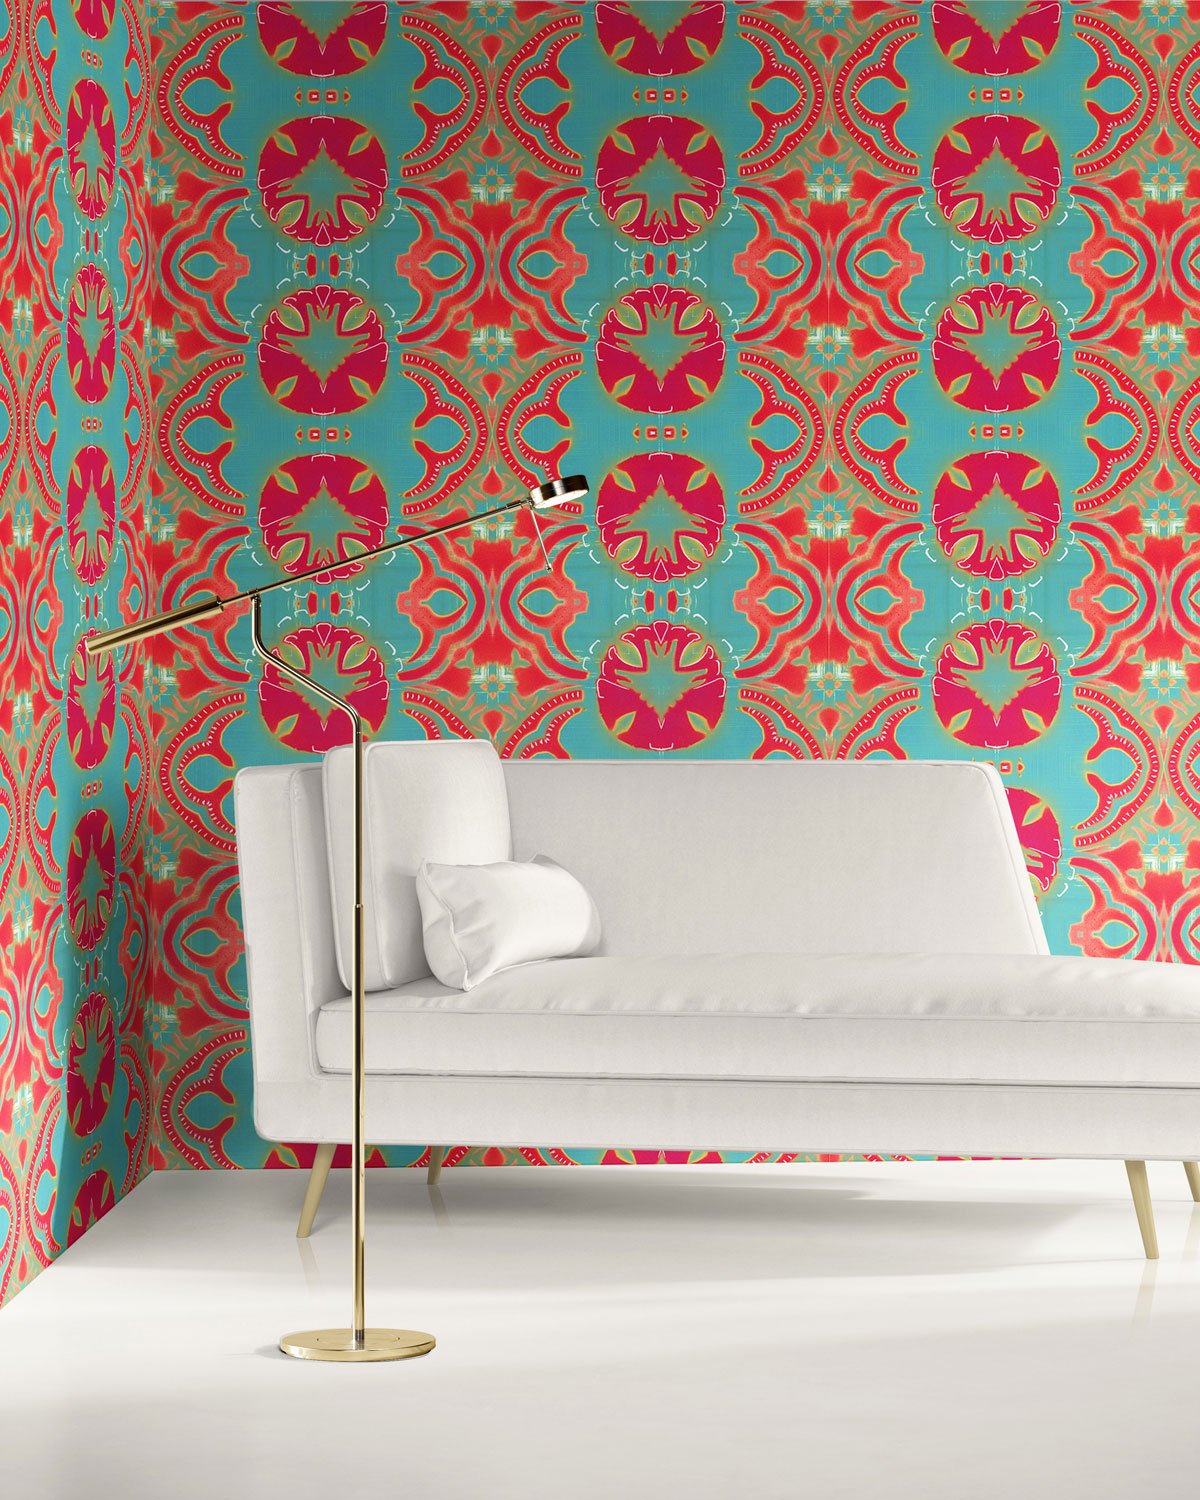 Morris-teal-magenta-coral-contemporary-arts-and-crafts-wallpaper-wallcovering-pearl-and-maude12.jpg